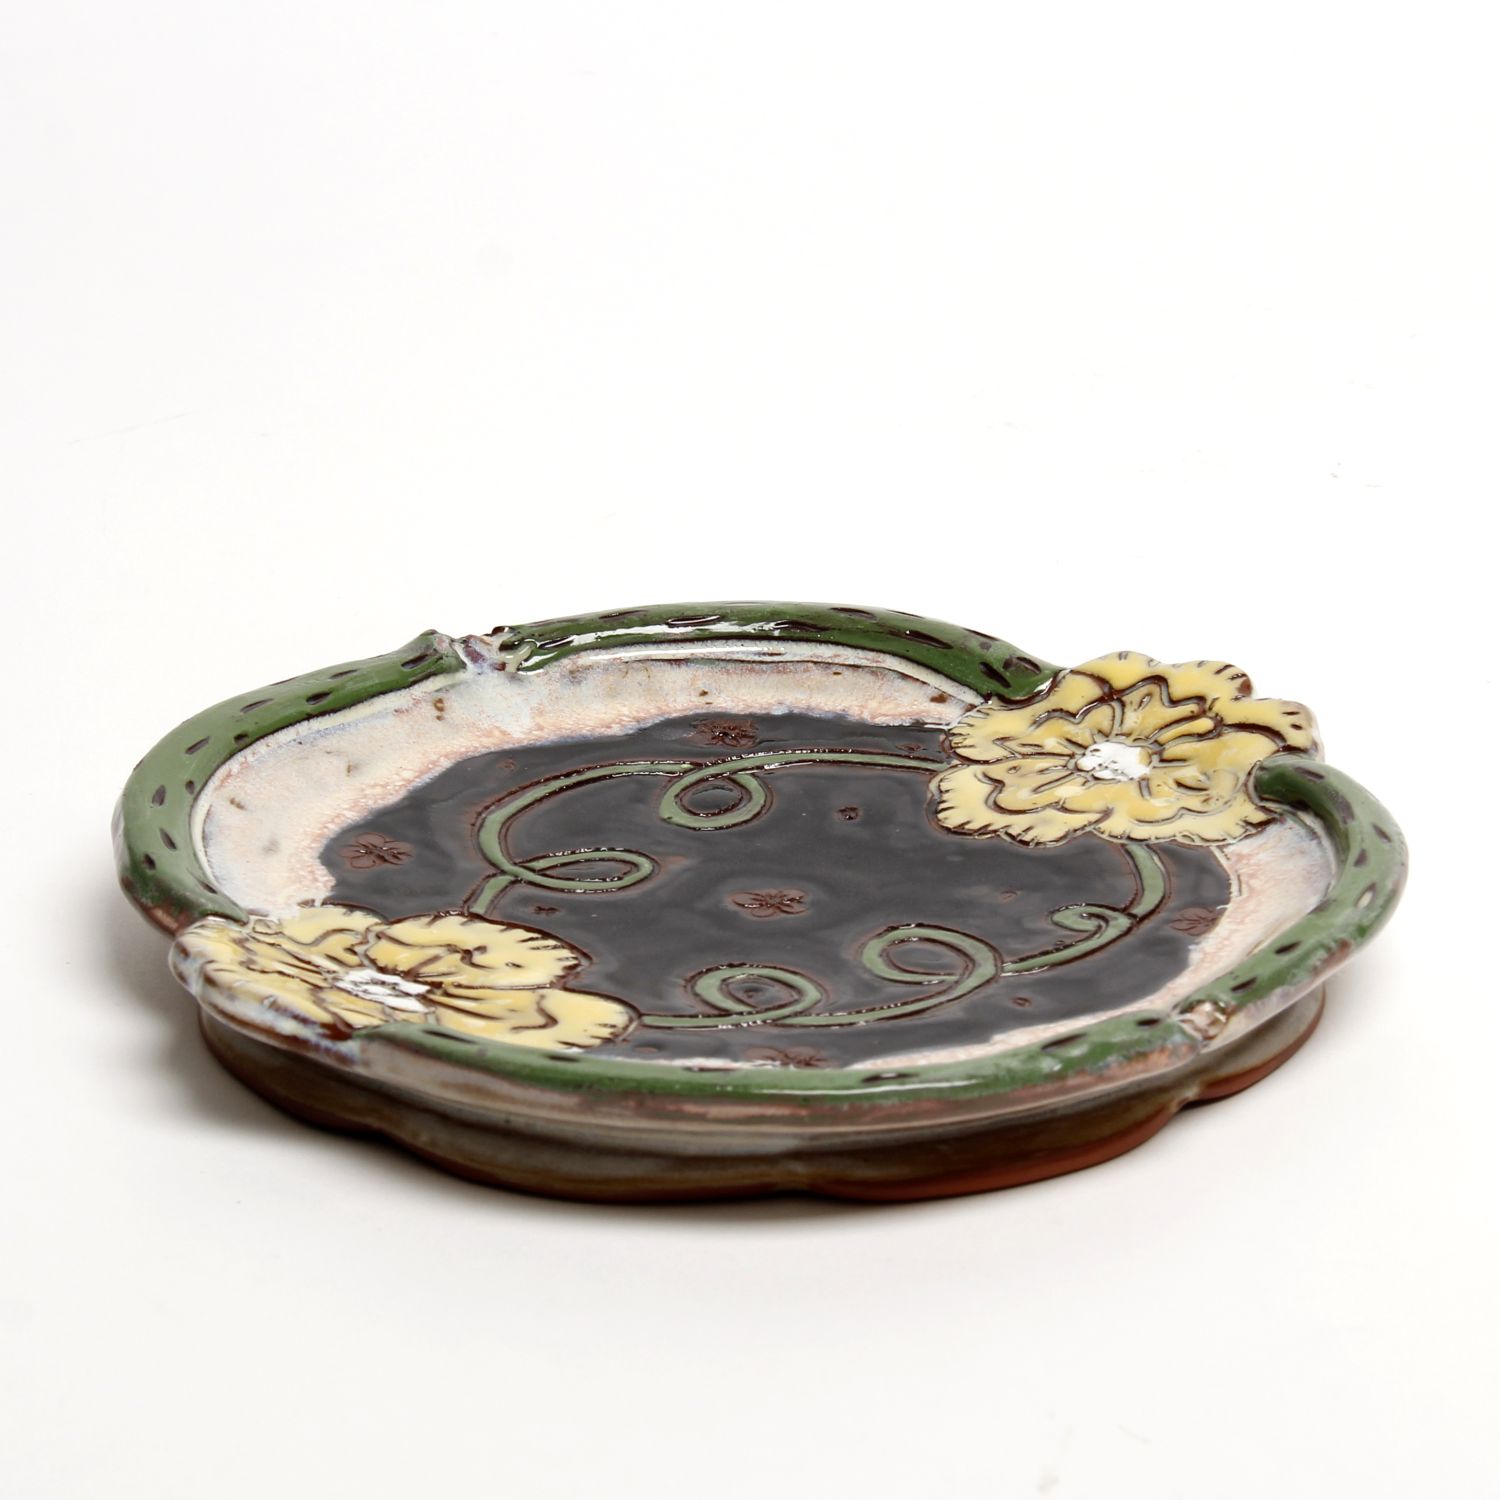 Zoe Pinnell: Yellow Flower Plate Product Image 3 of 3